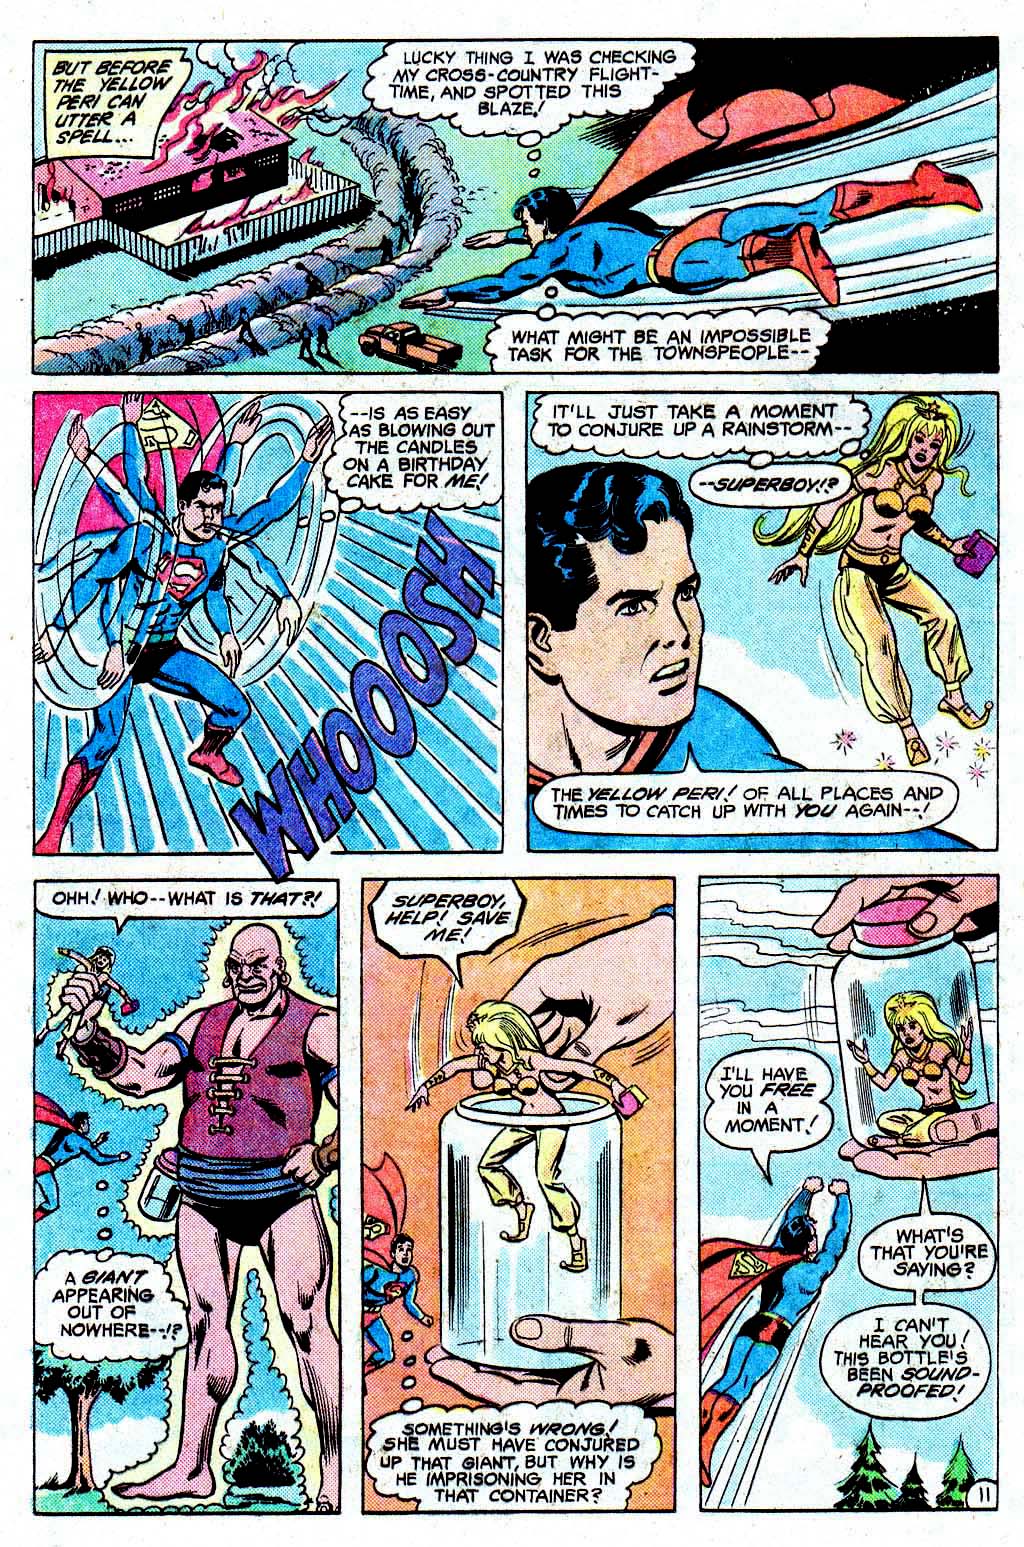 The New Adventures of Superboy 35 Page 15